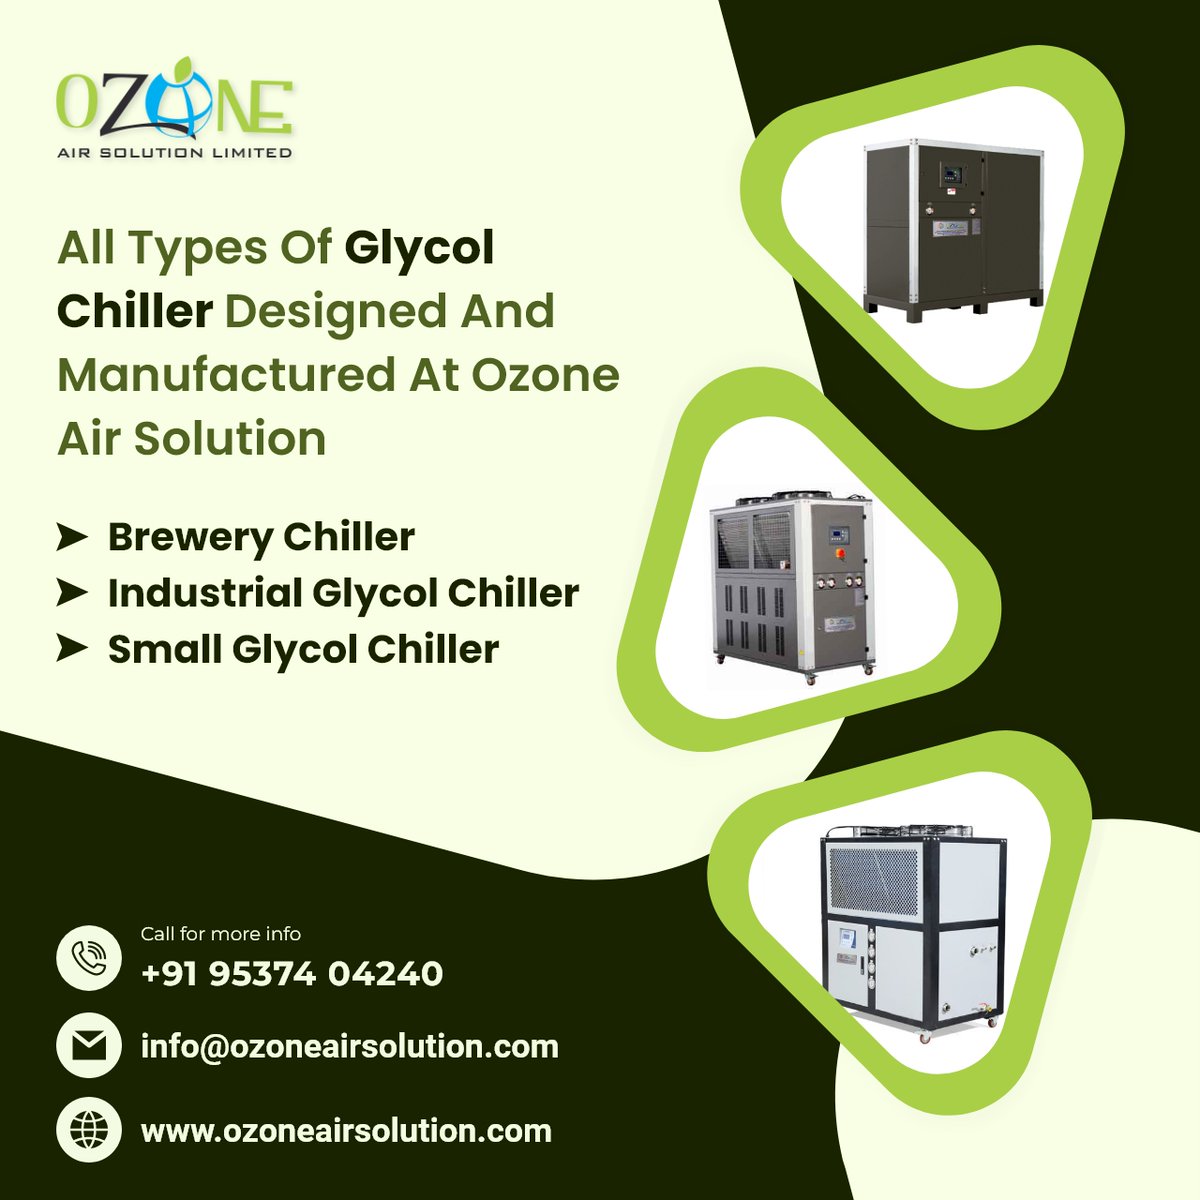 All Type Of Glycol Chiller Designed And Manufactured At #OzoneAirSolution

👉 Brewery Chiller
👉 Industrial Glycol Chiller
👉 Small Glycol Chiller

#GlycolChiller #CoolingSolutions #OzoneAirSolution #IndustrialCooling #BreweryEquipment #PrecisionCooling #EfficientCooling